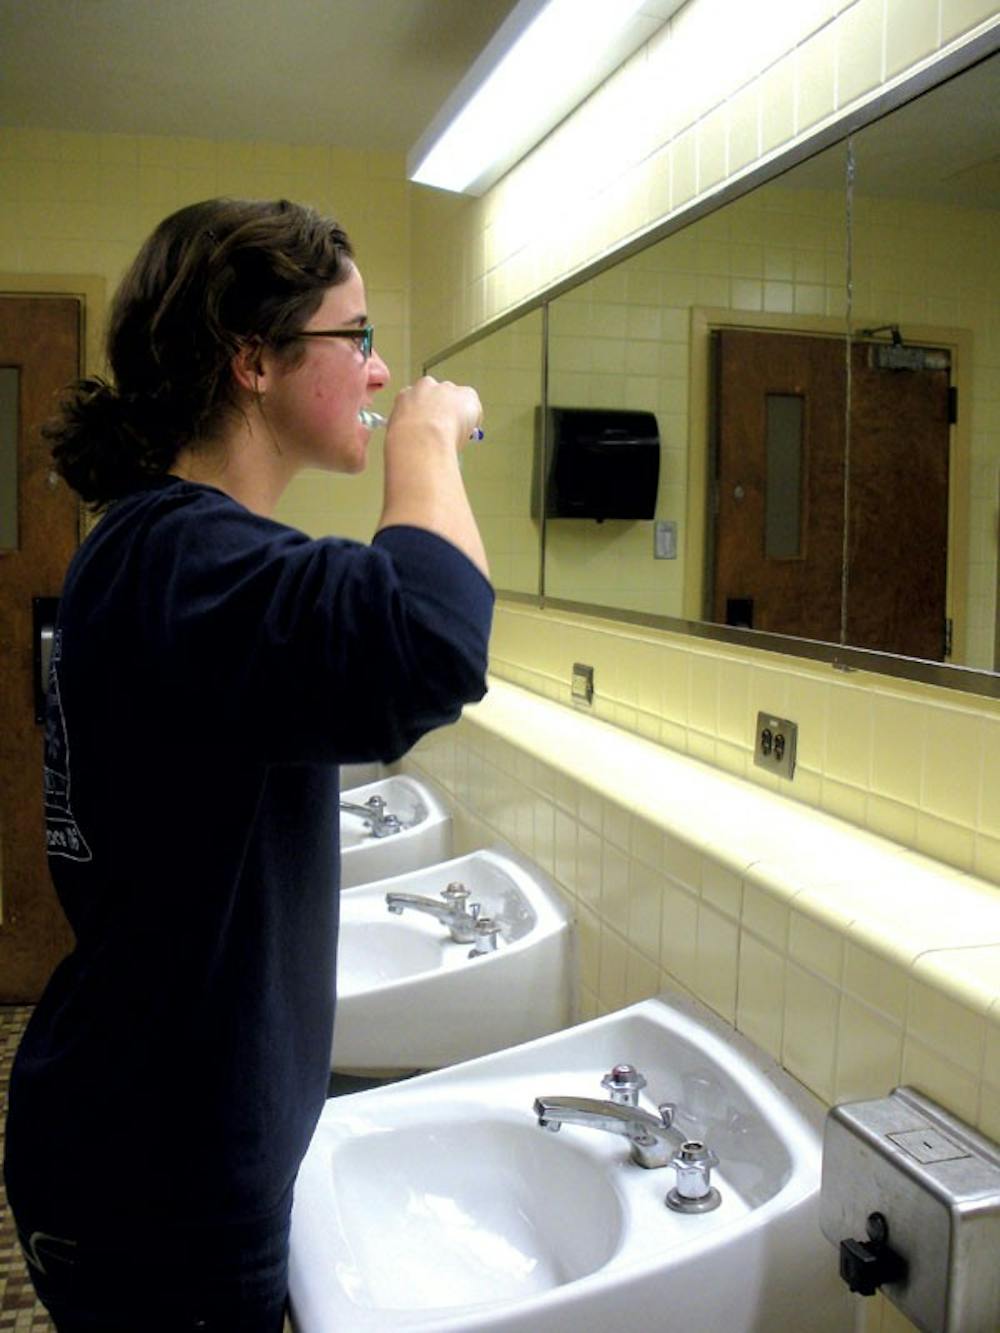 First-year Gabby Trojanowski does her part during Unplugged, Untapped, Game On! by turning off the water while brushing her teeth Wednesday at Emerson Hall.